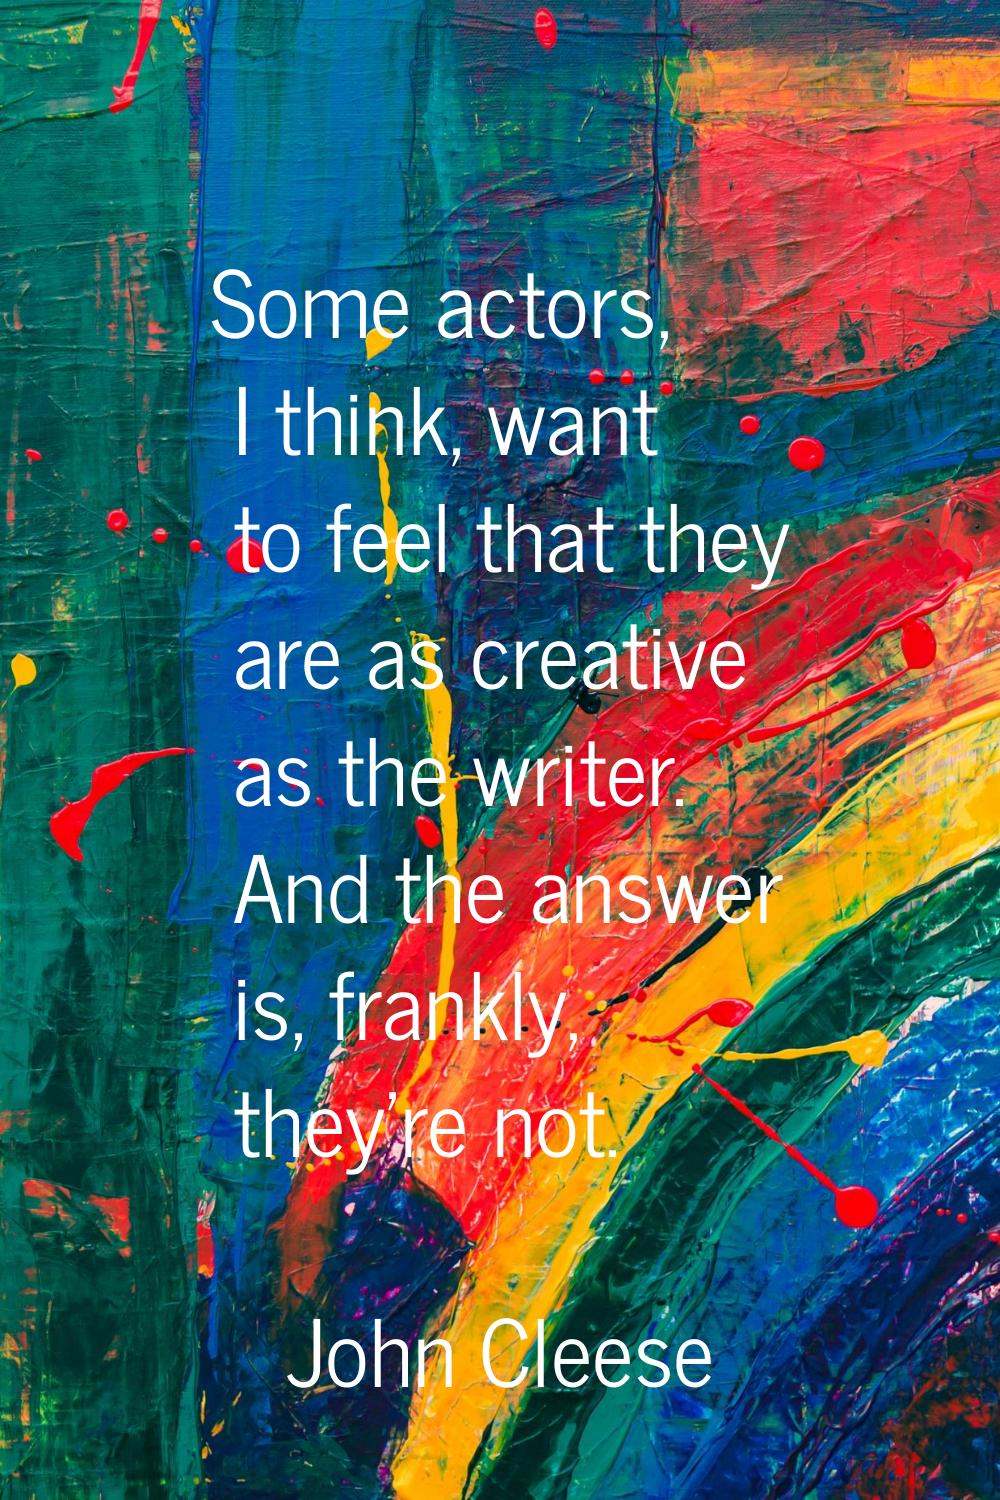 Some actors, I think, want to feel that they are as creative as the writer. And the answer is, fran